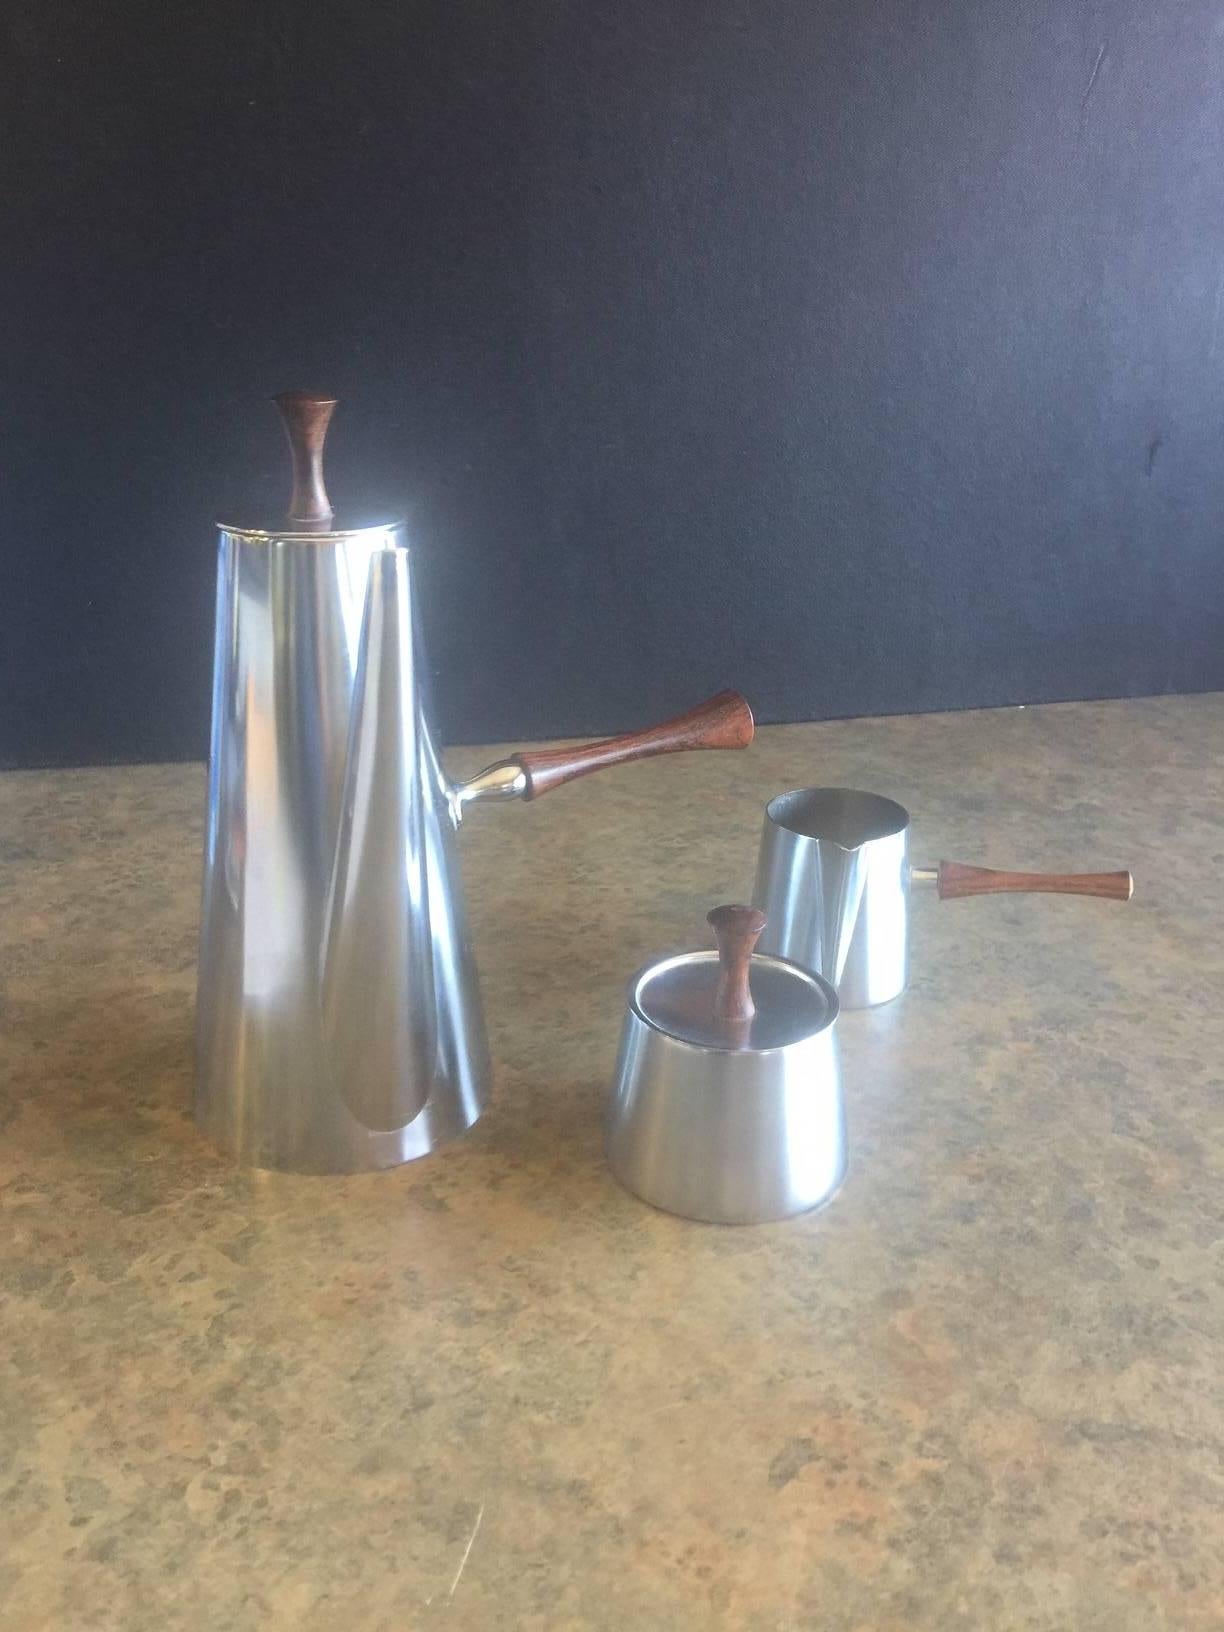 Very stylish three-piece, midcentury coffee set by Kalmar Designs manufactured in Italy. Each piece is made of seamless stainless steel with a solid teak handle. Very nice set in great condition.